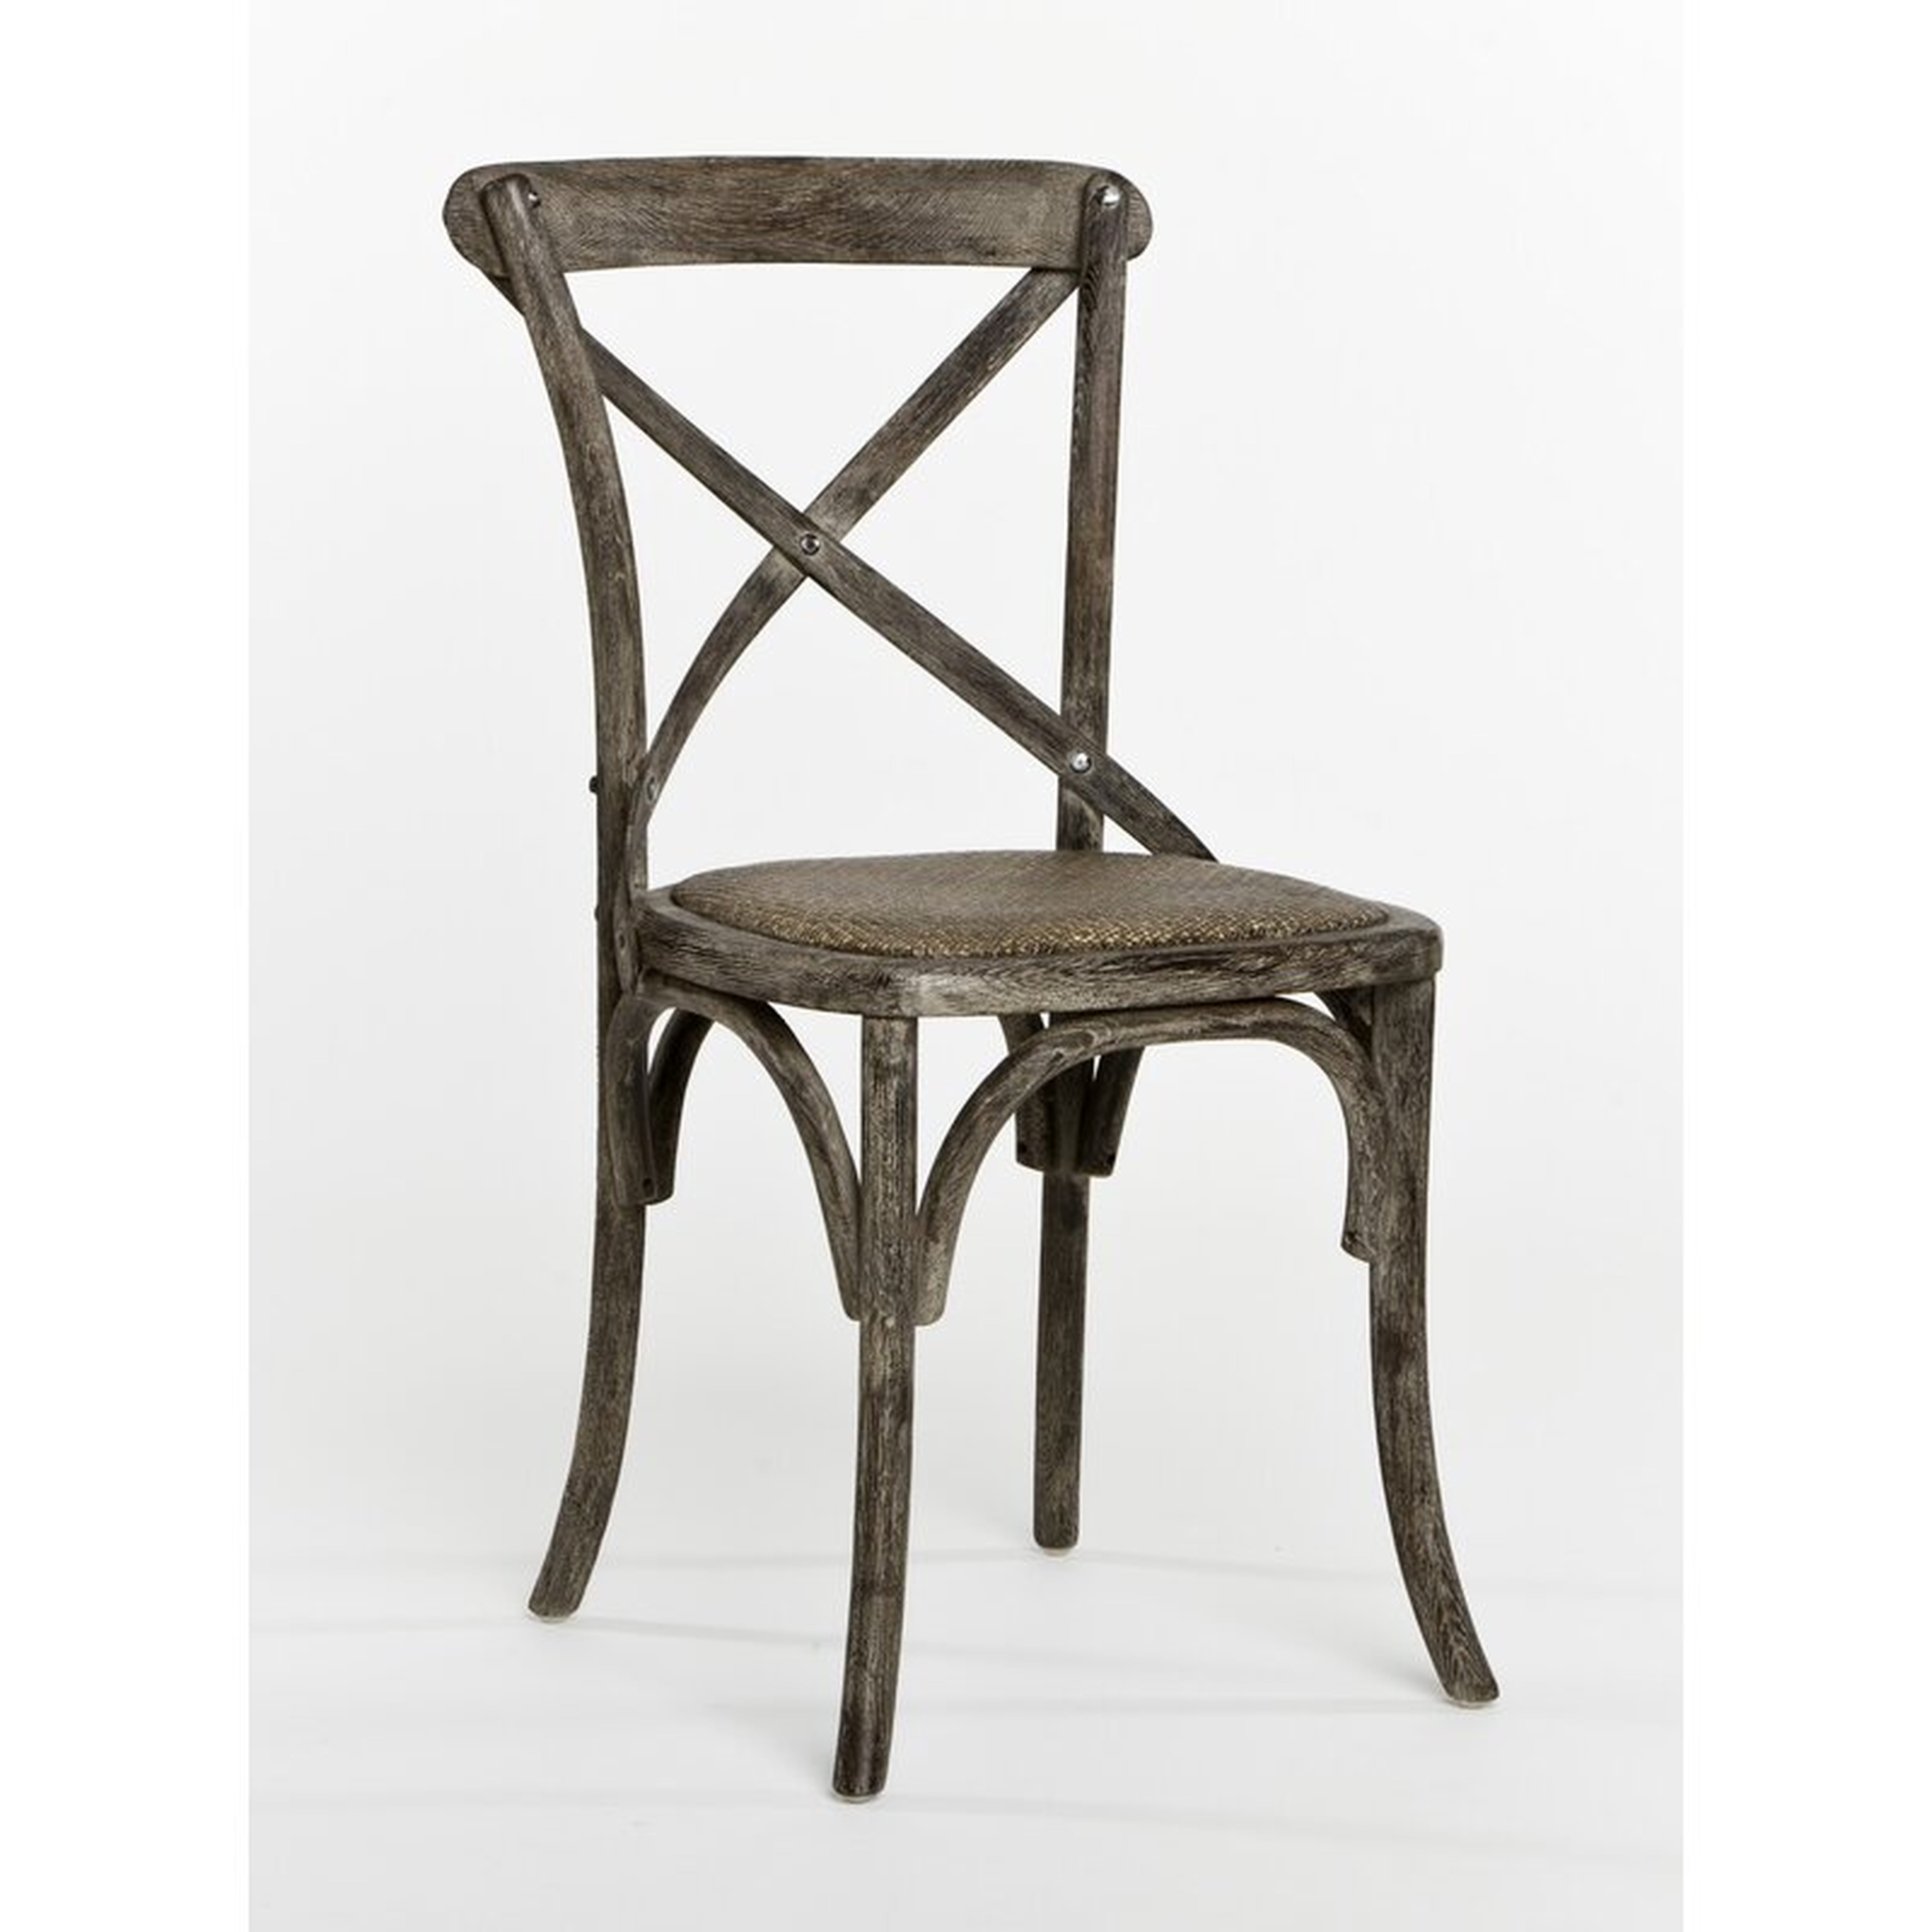 Zentique Parisienne Cafe Solid Wood Cross Back Dining Chair Color: Limed Charcoal Oak - Perigold